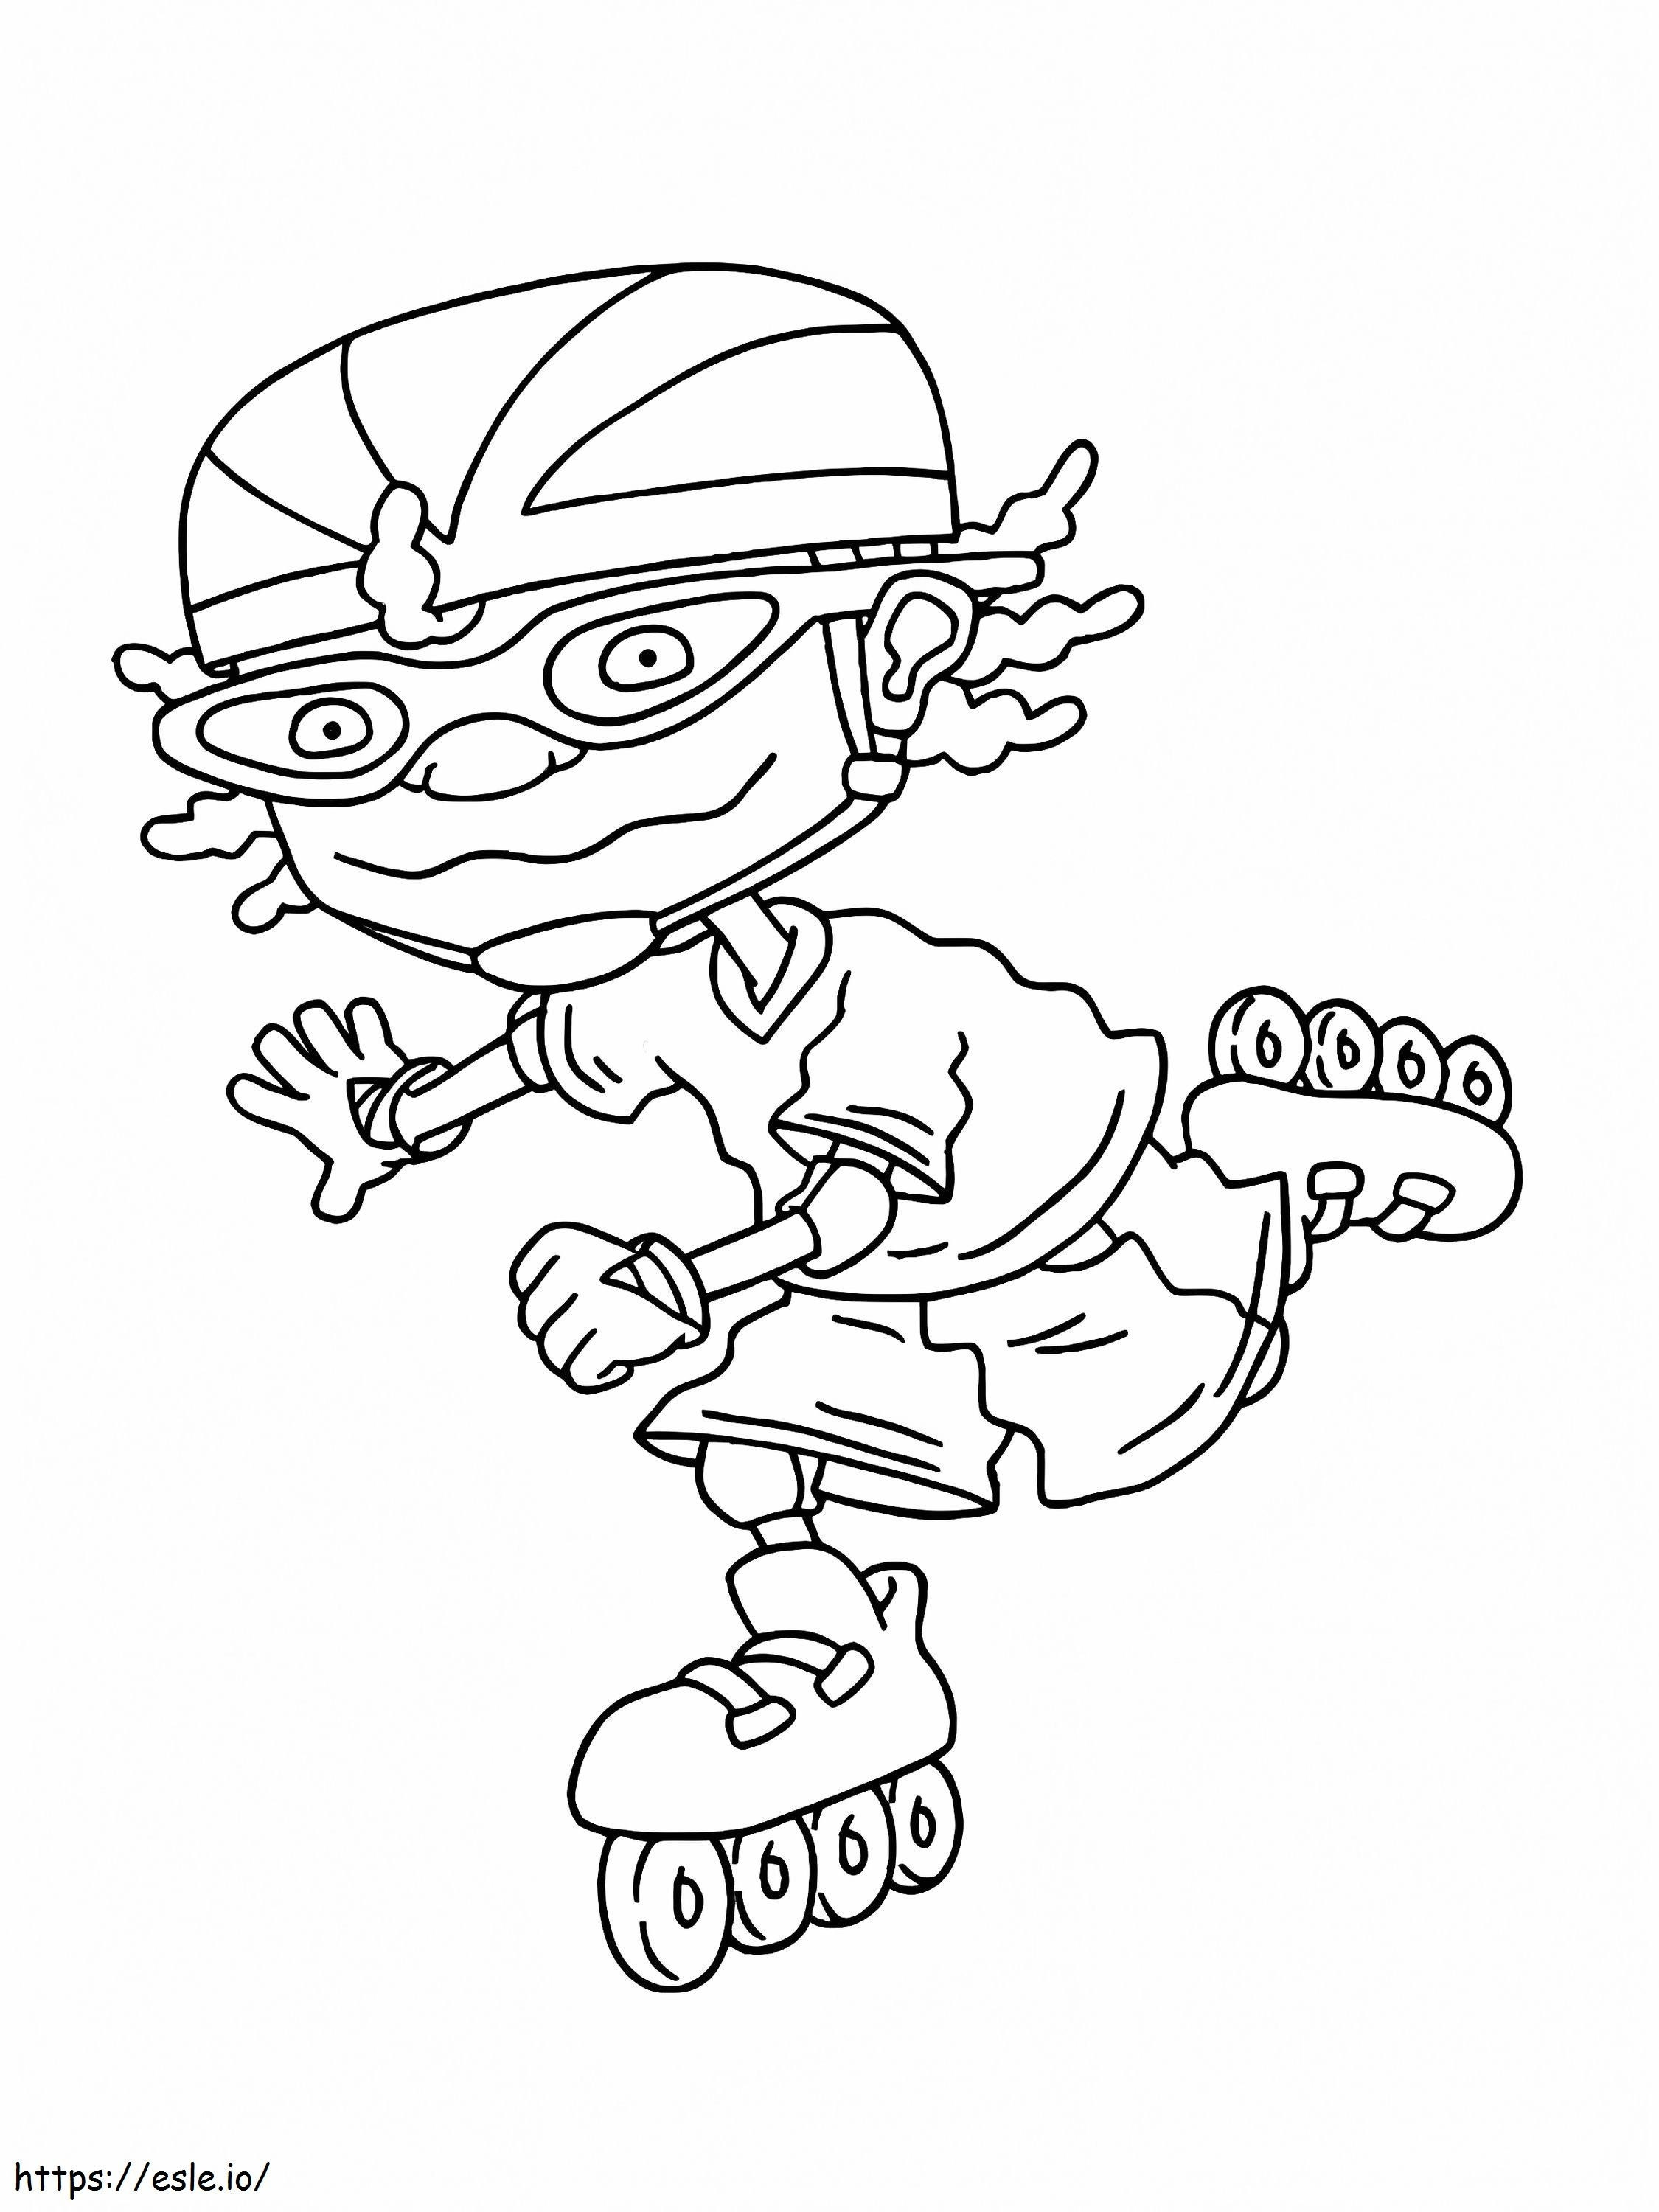 Rocket Power 2 coloring page